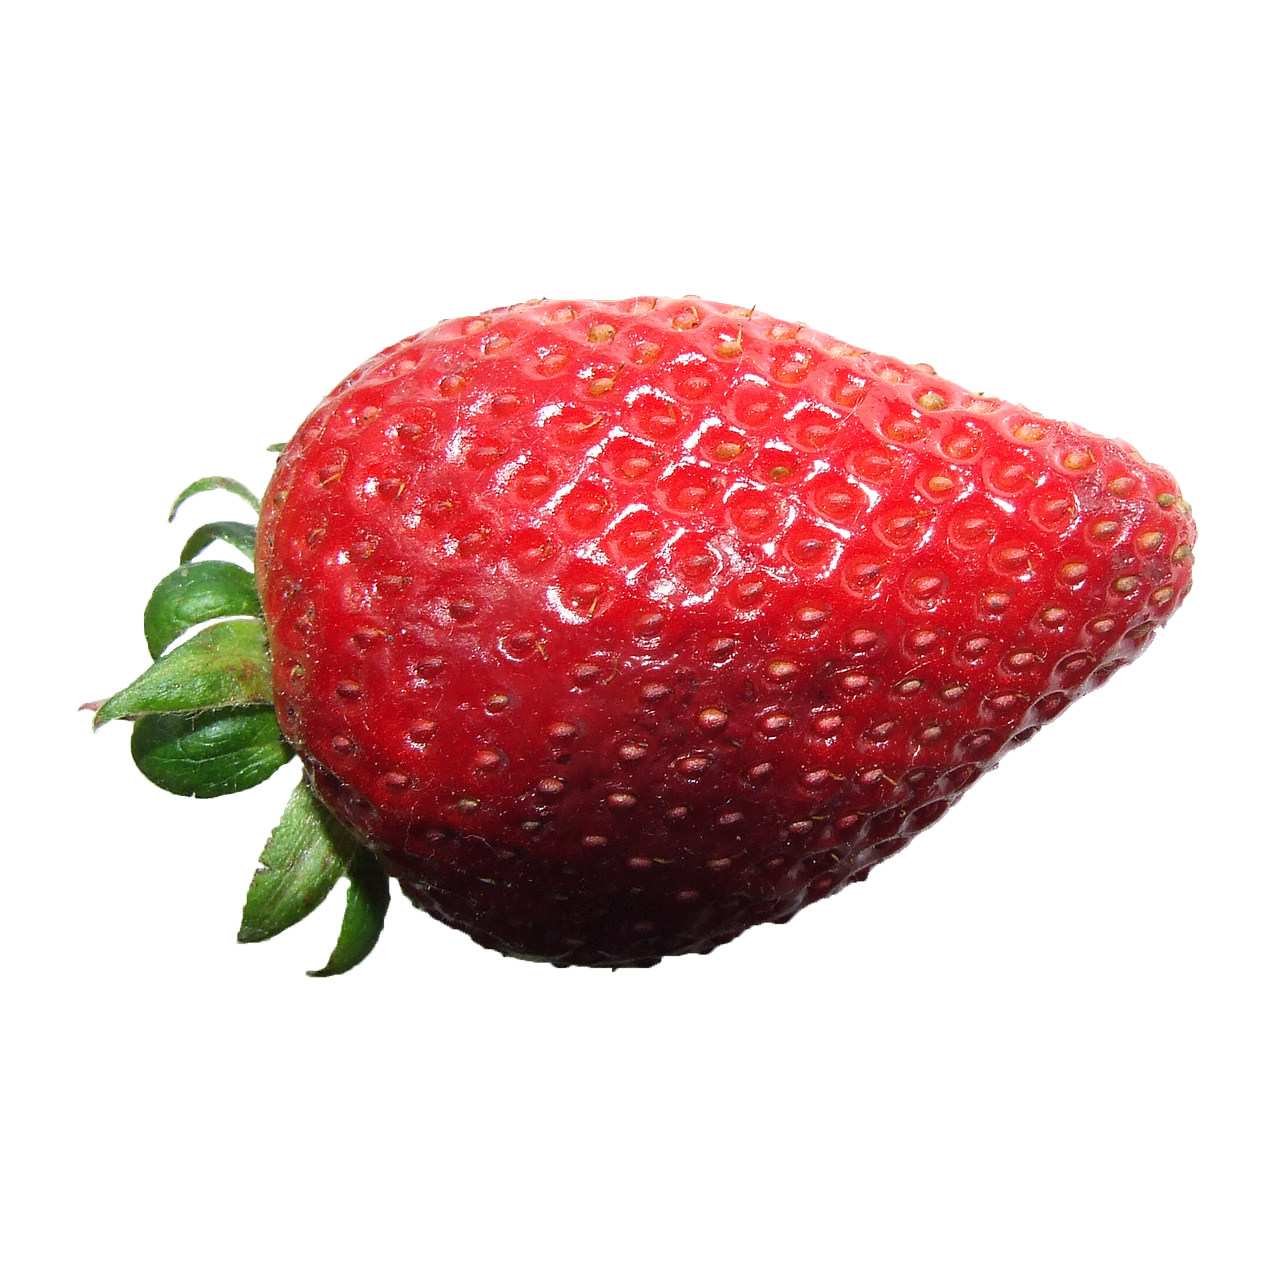 strawberry red fruit free photo